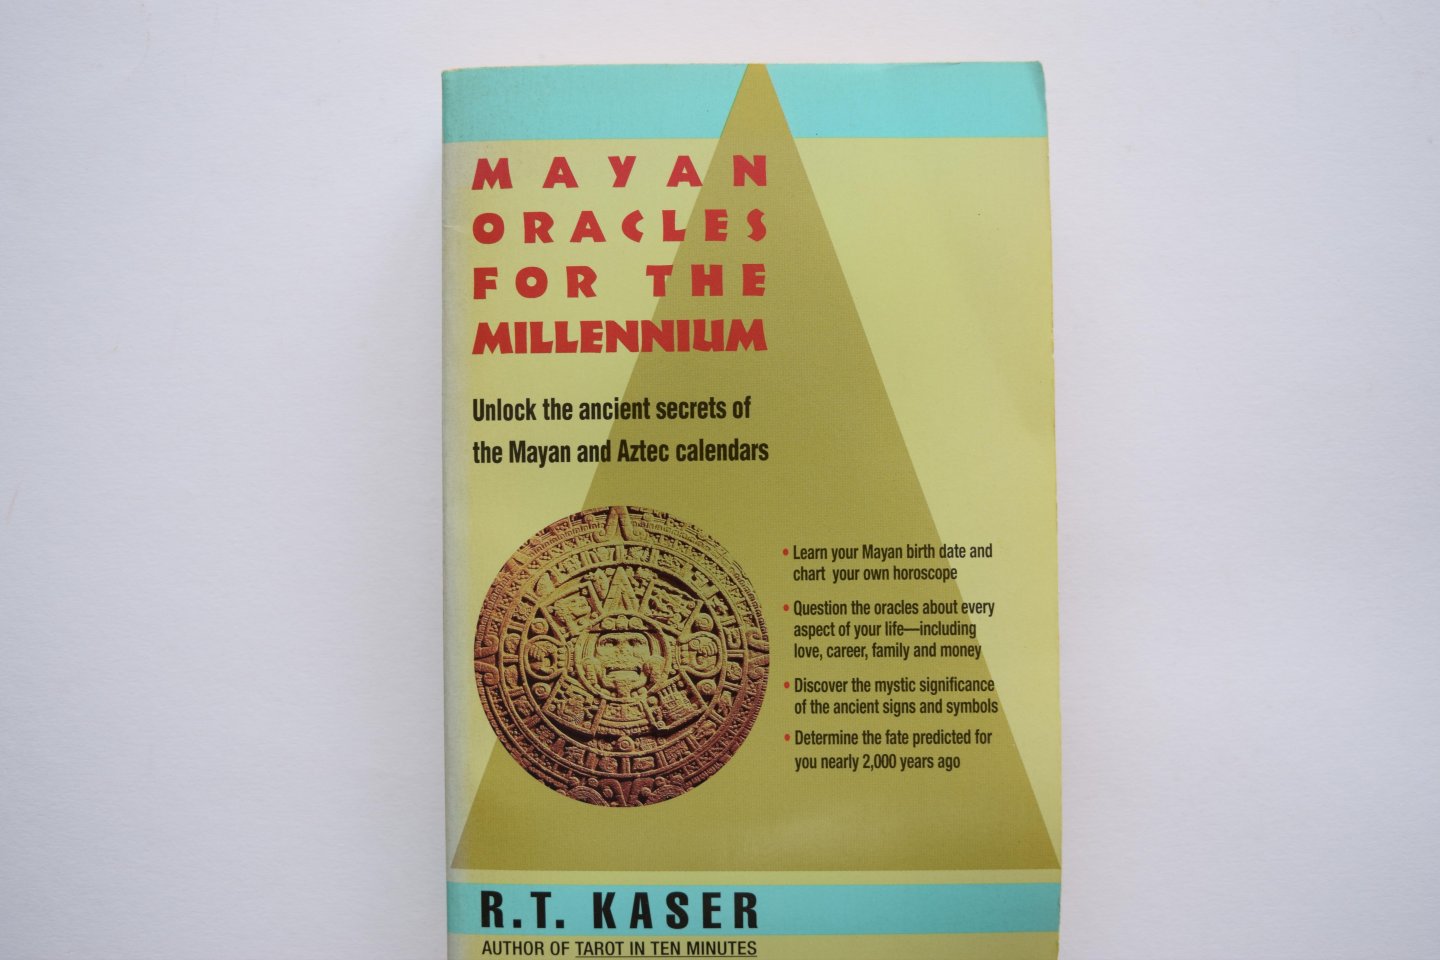 Kaser, R.T. - Mayan Oracles for the Millennium